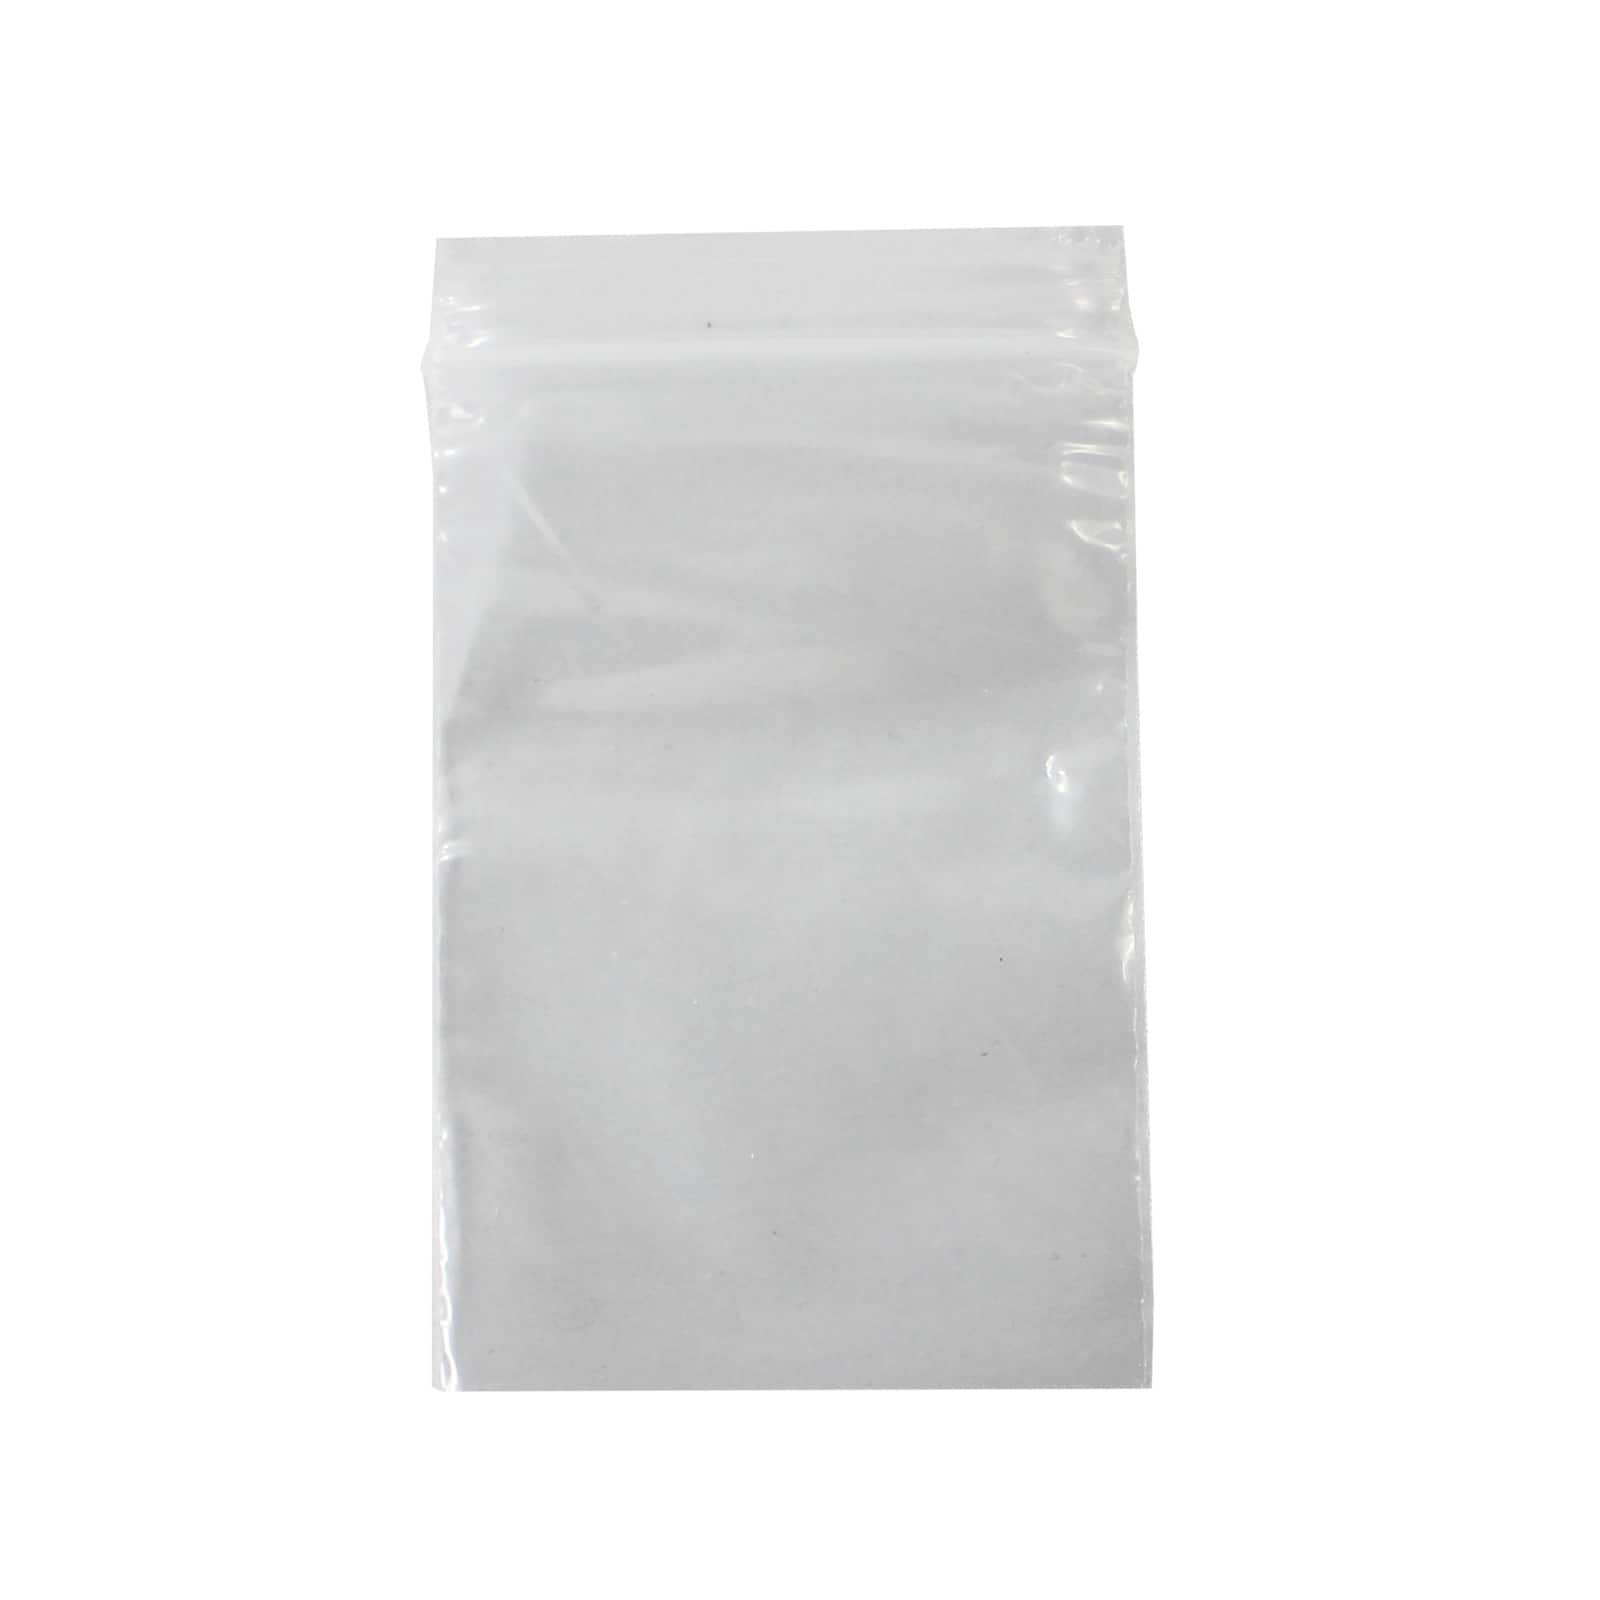 9" x 13" Clear Poly Bags Pack of 50 bags 3 Mil 